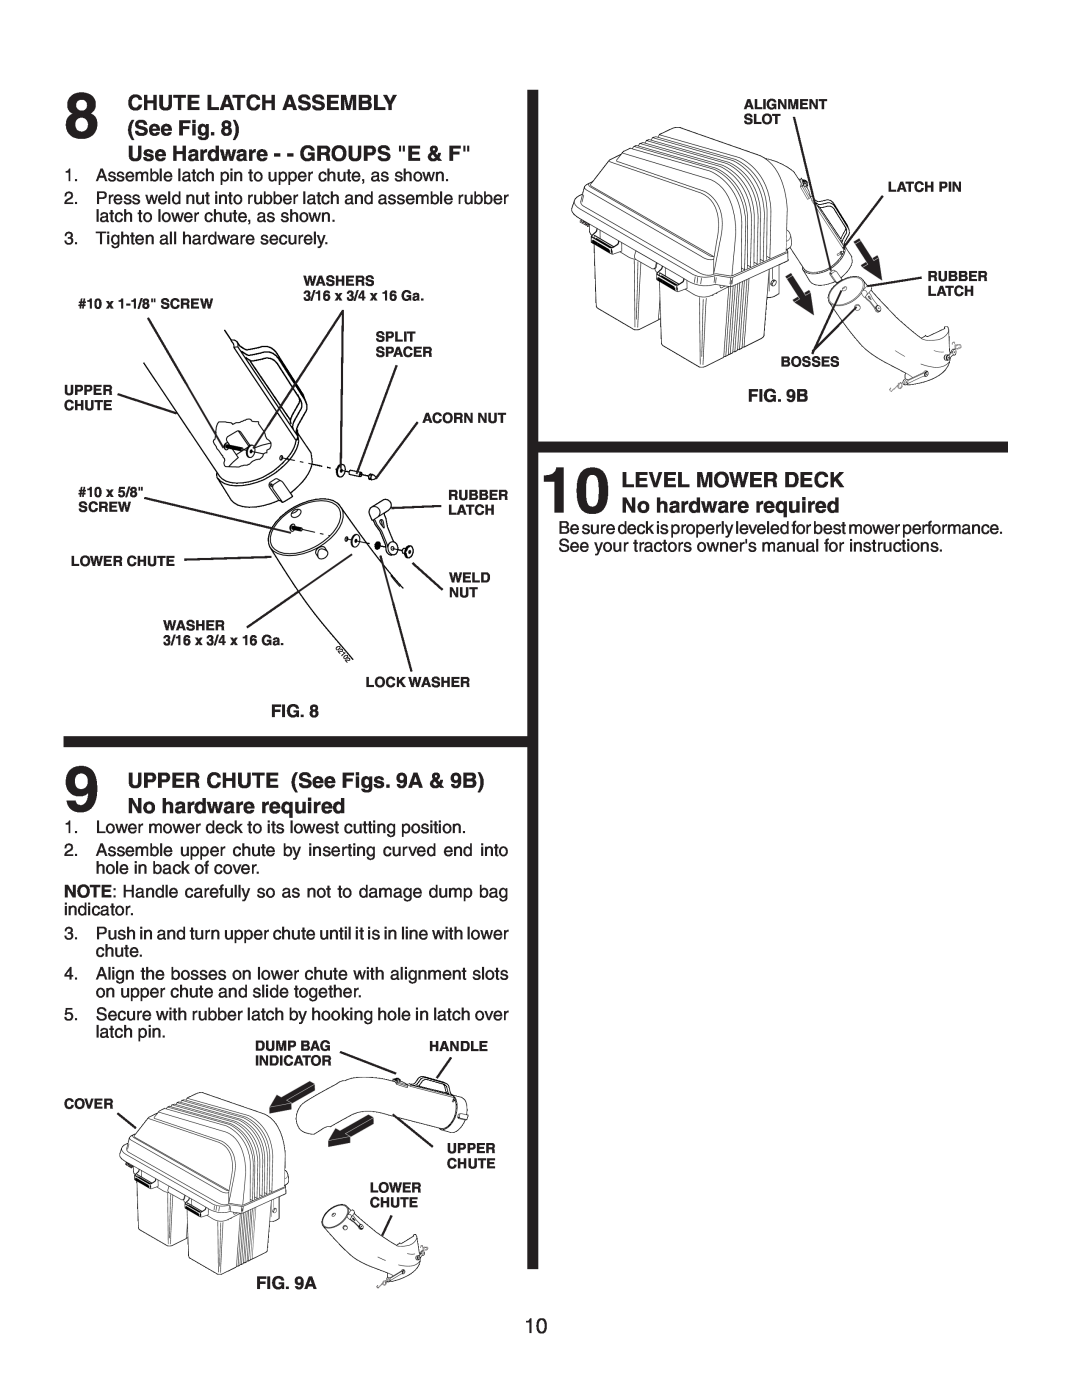 Poulan 532175732, CL36A owner manual Use Hardware - - GROUPS E & F, UPPER CHUTE See Figs. 9A & 9B, Chute Latch Assembly 